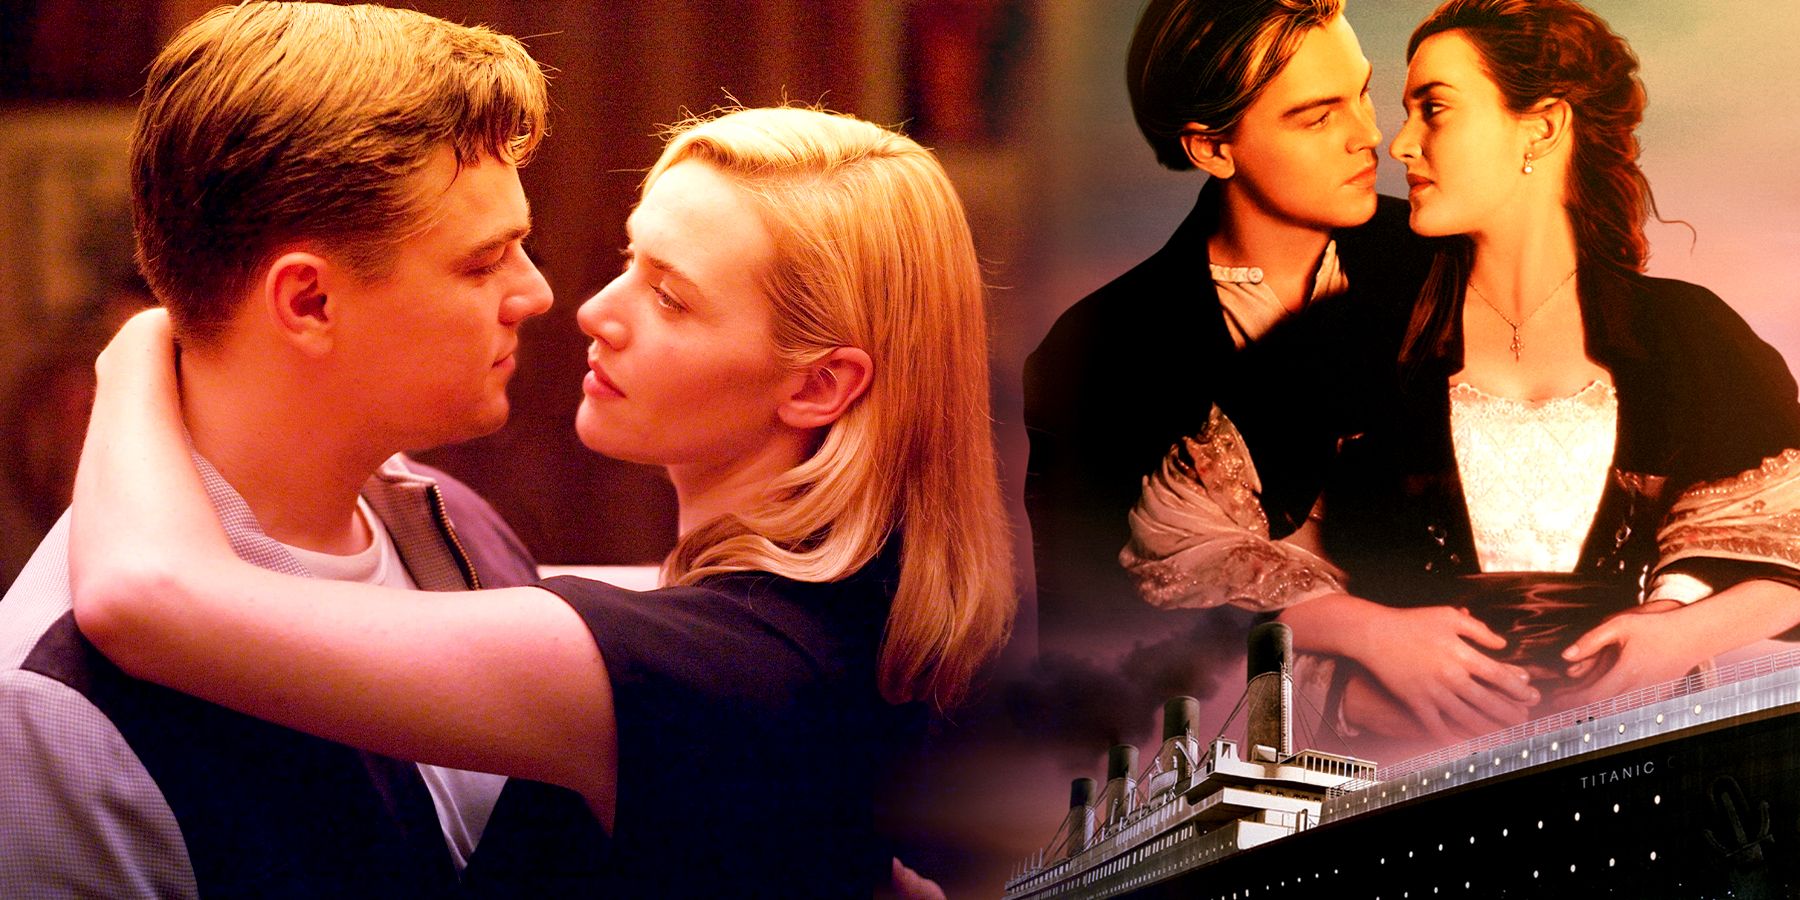 Duo Pictures of Kate Winslet/Leonardo DiCaprio in Revolutionary Road and Titanic